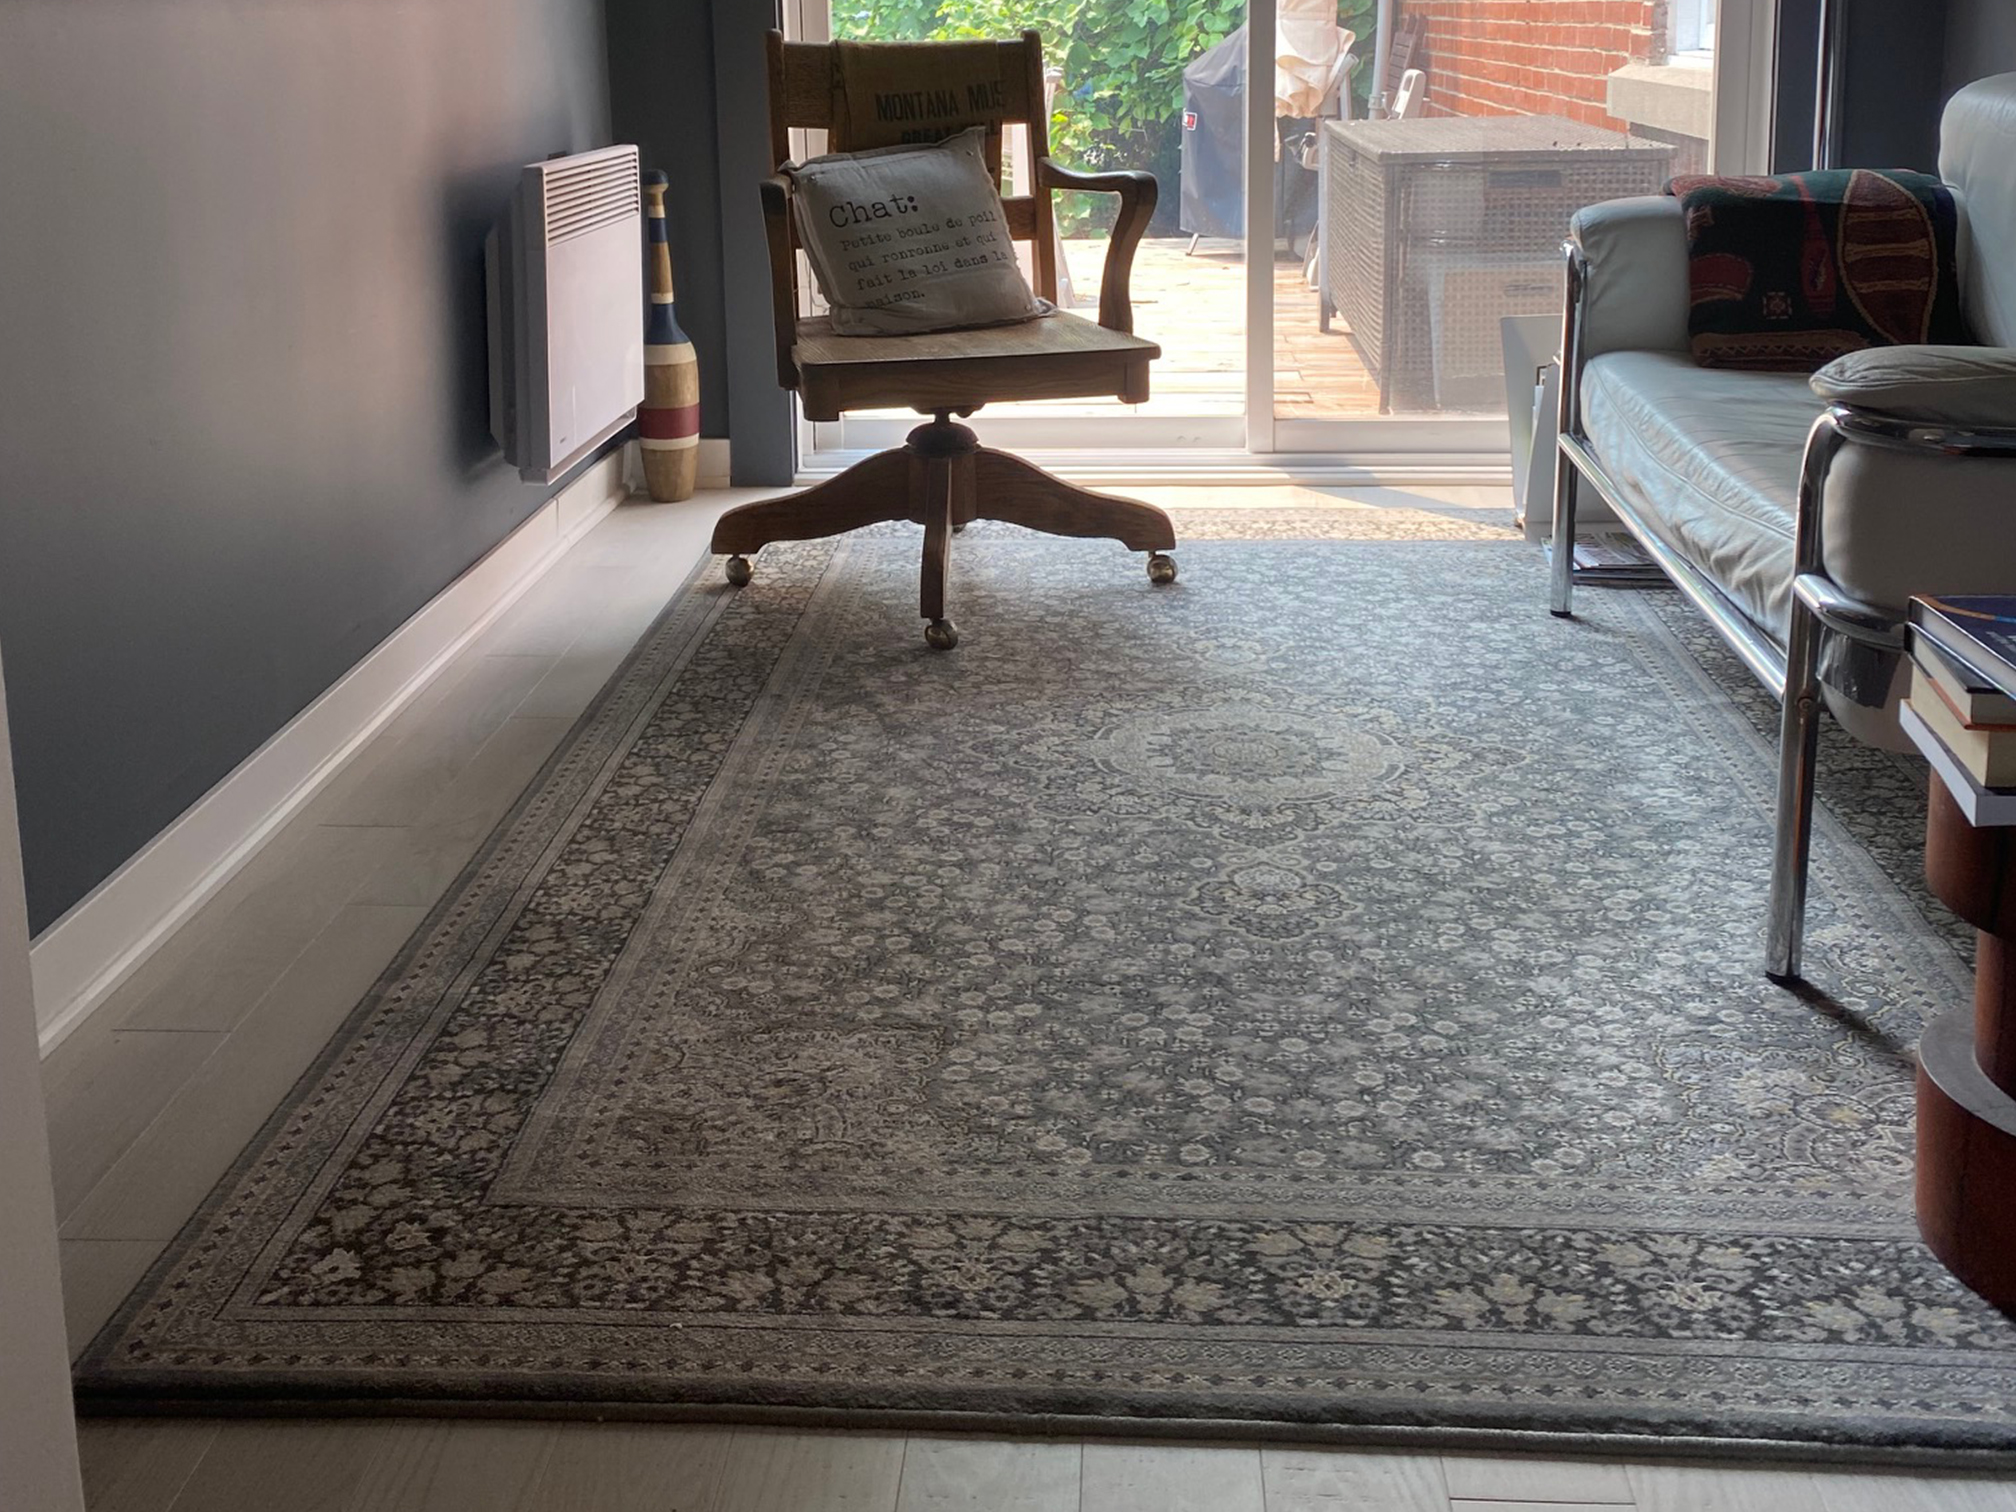 A picture of a customer's carpet inside their home.